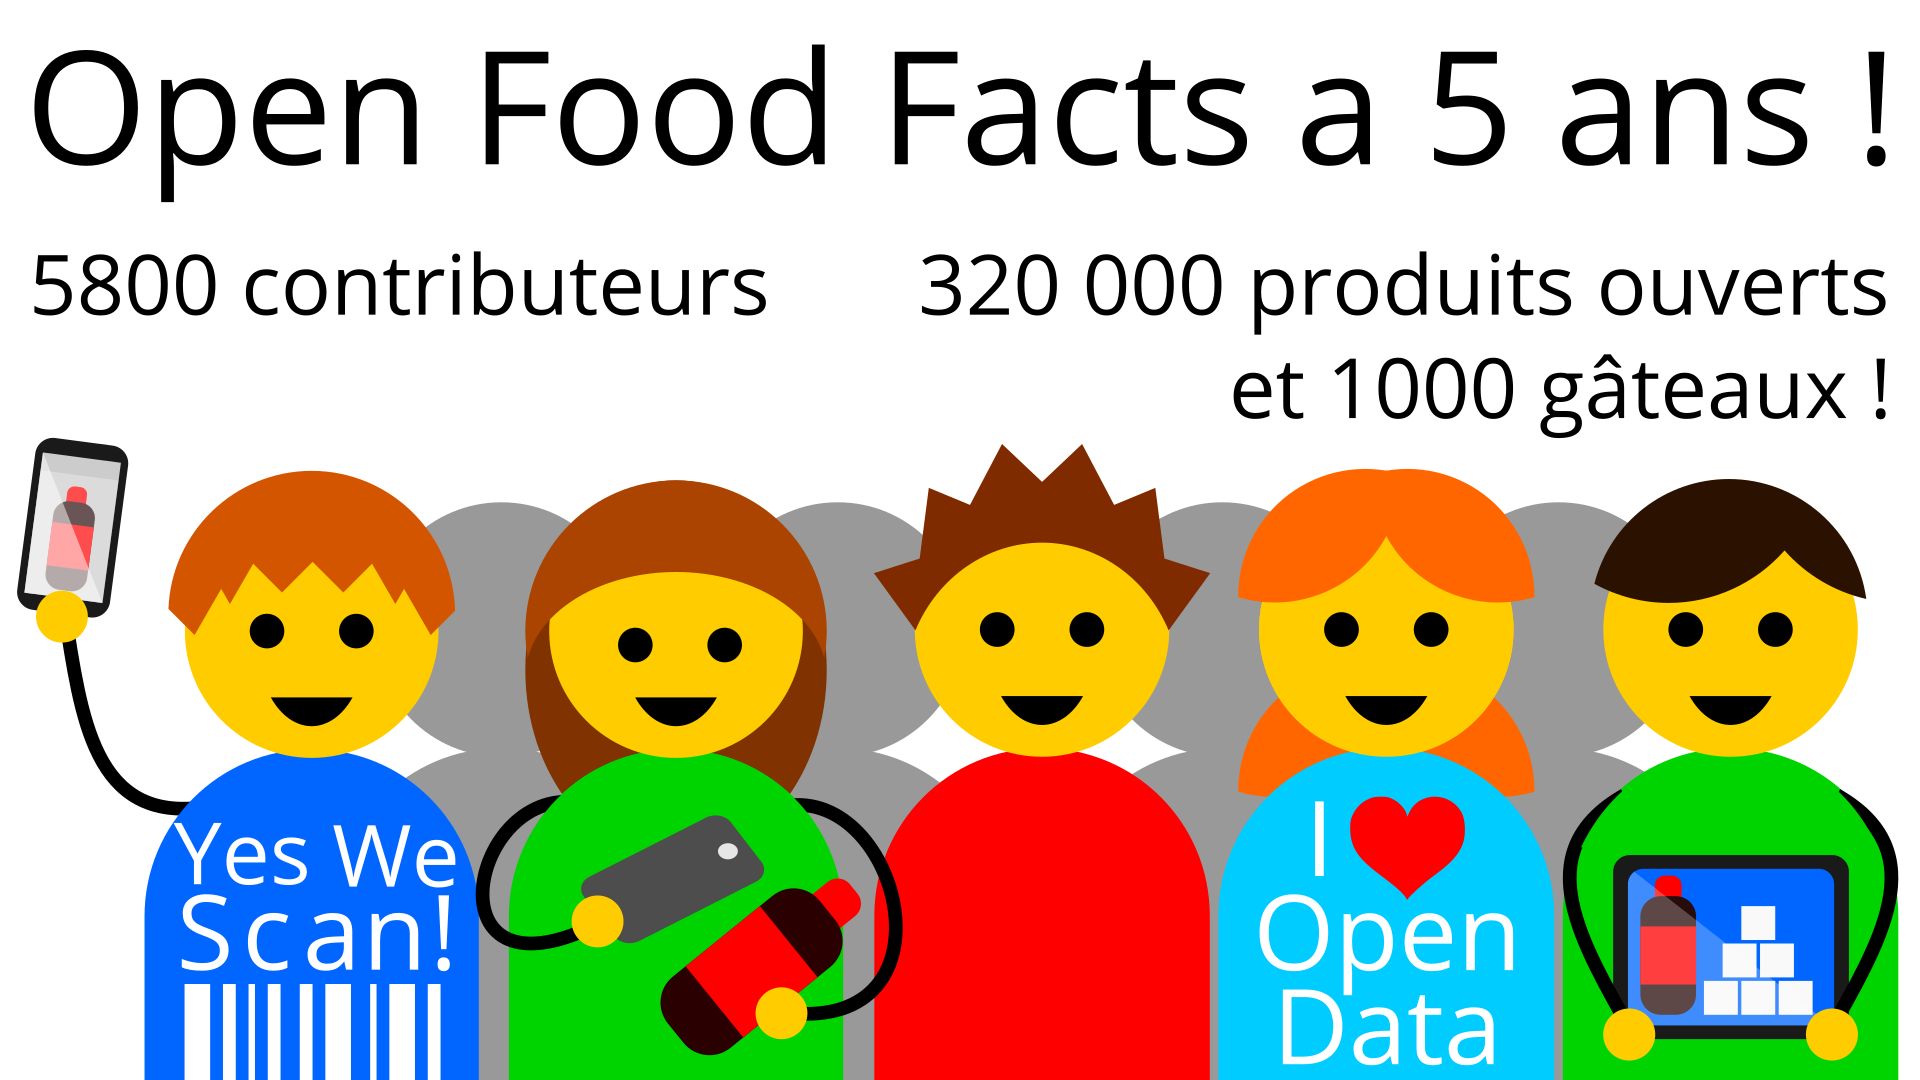 Open Food Facts a 5 ans !